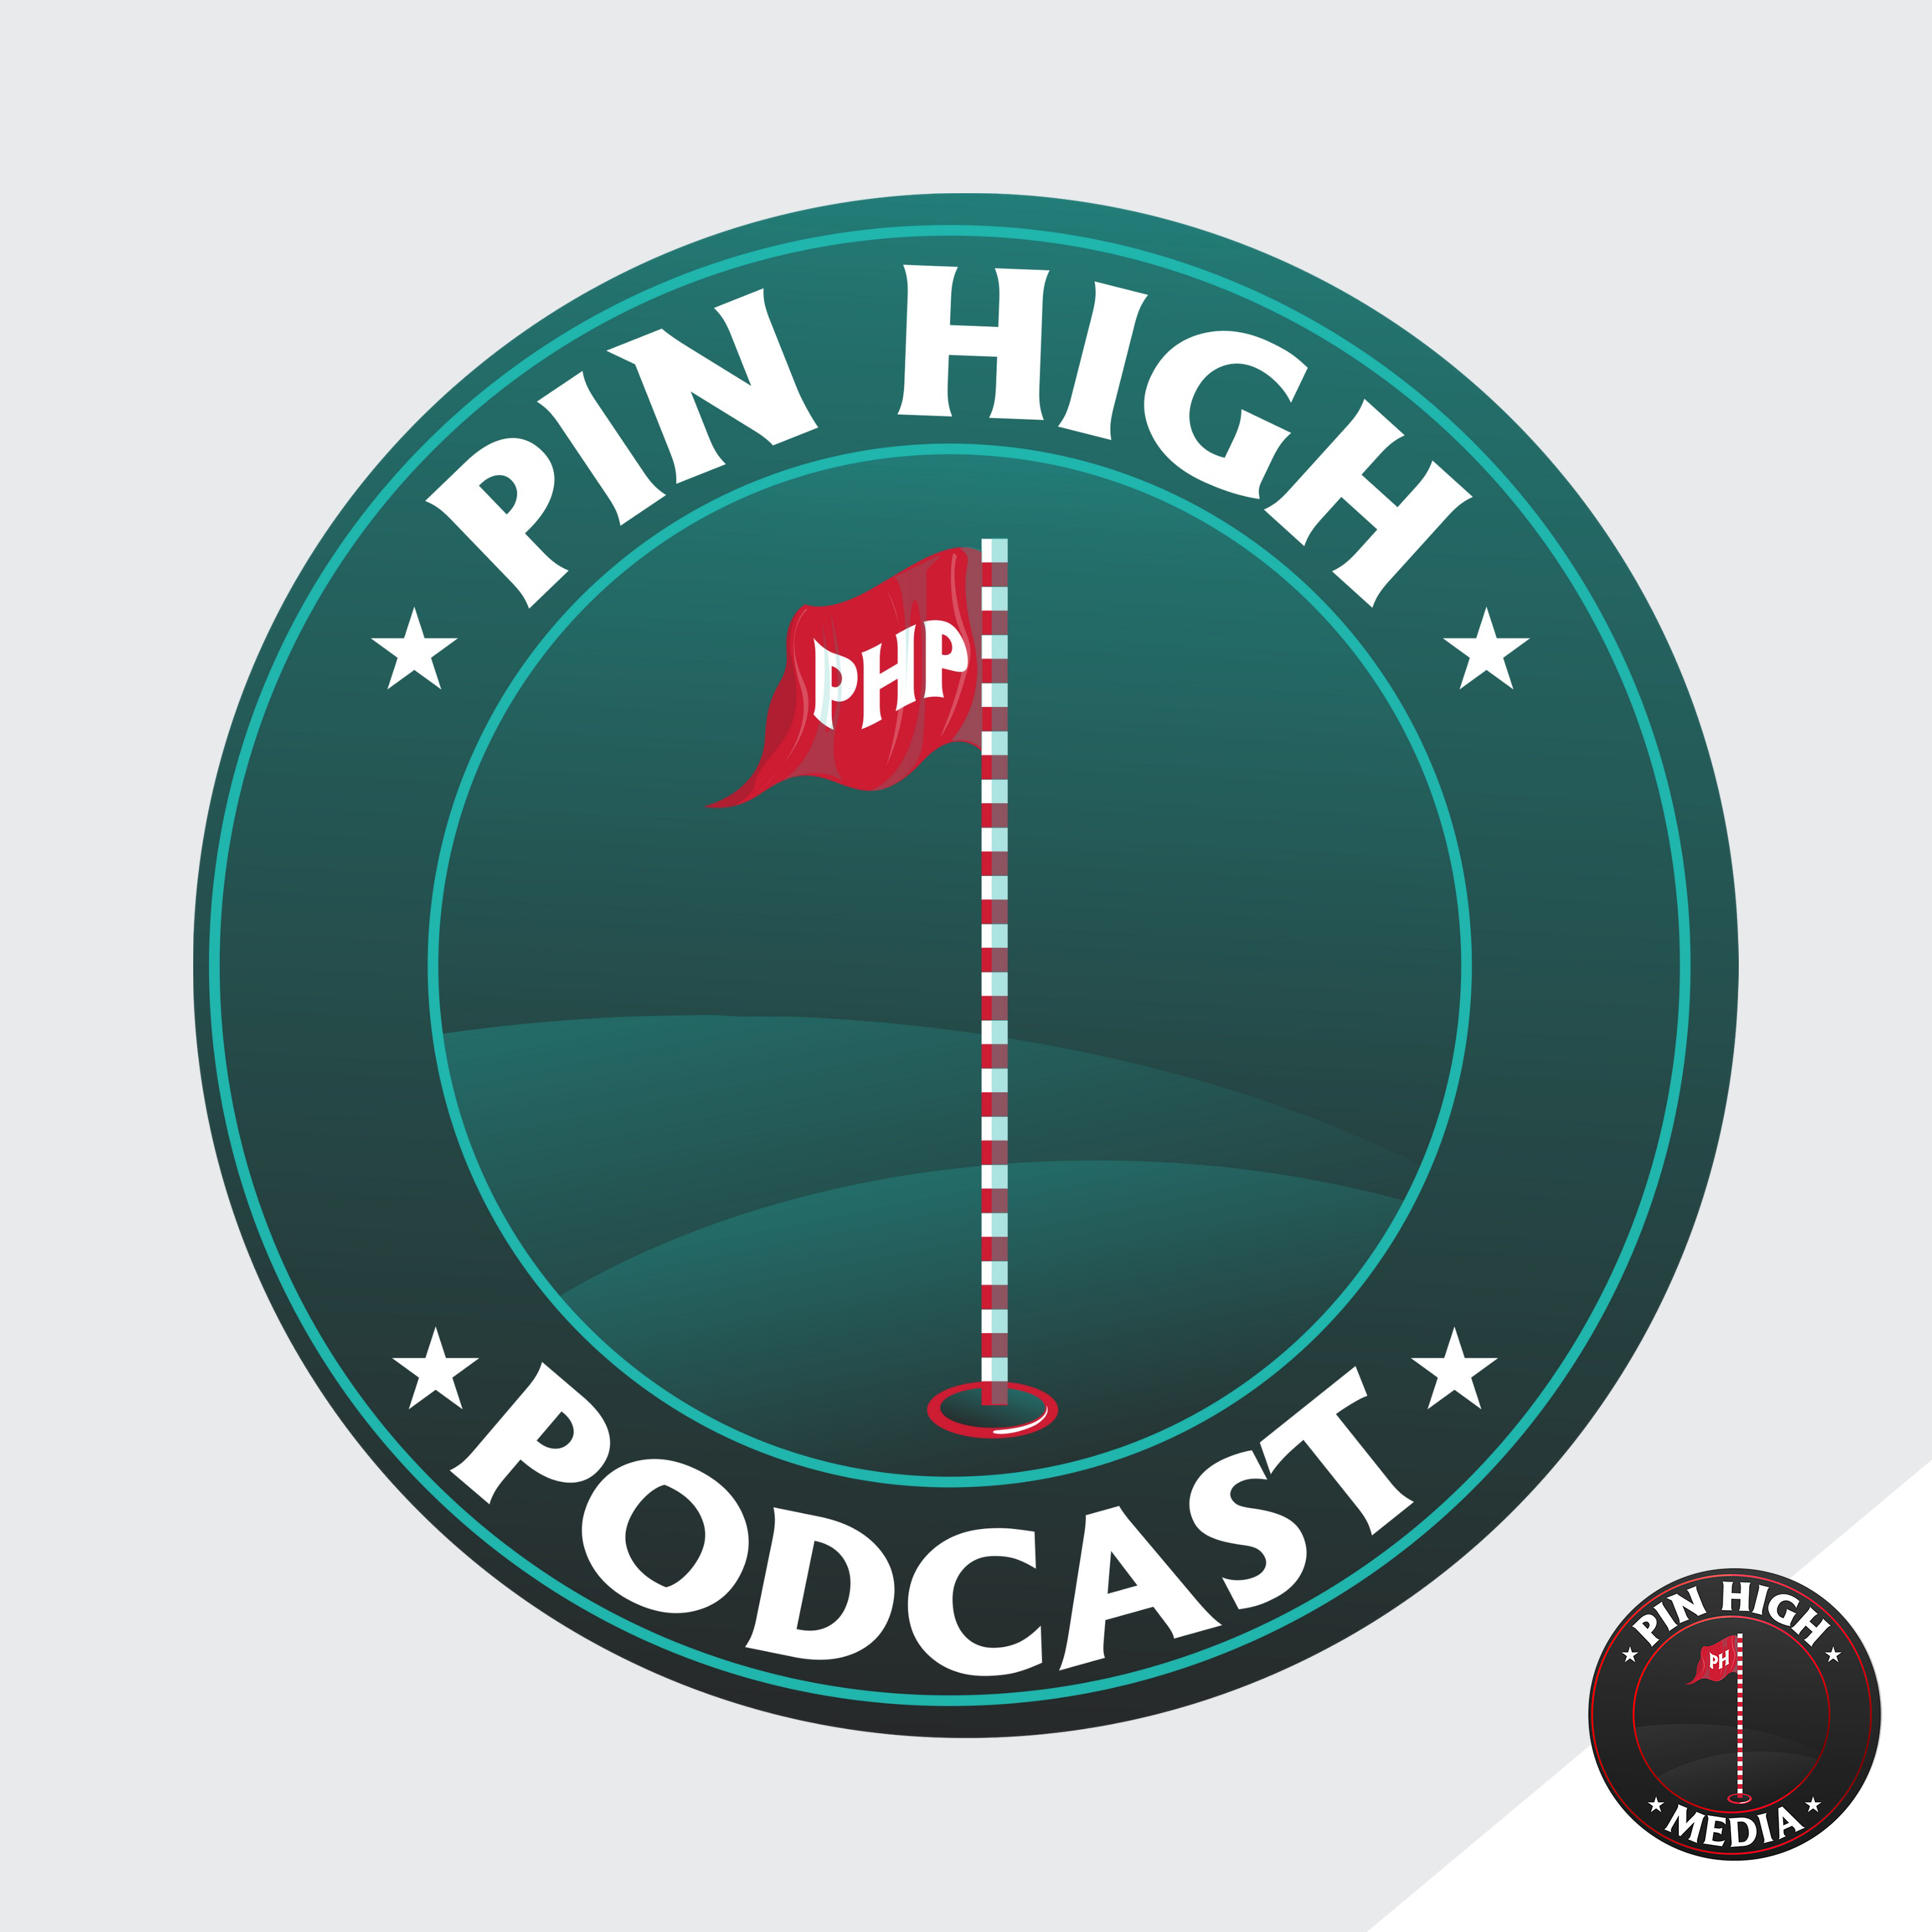 Pin High Podcast Ep. 113: Interview With Mr. Style, Marty Hackel!